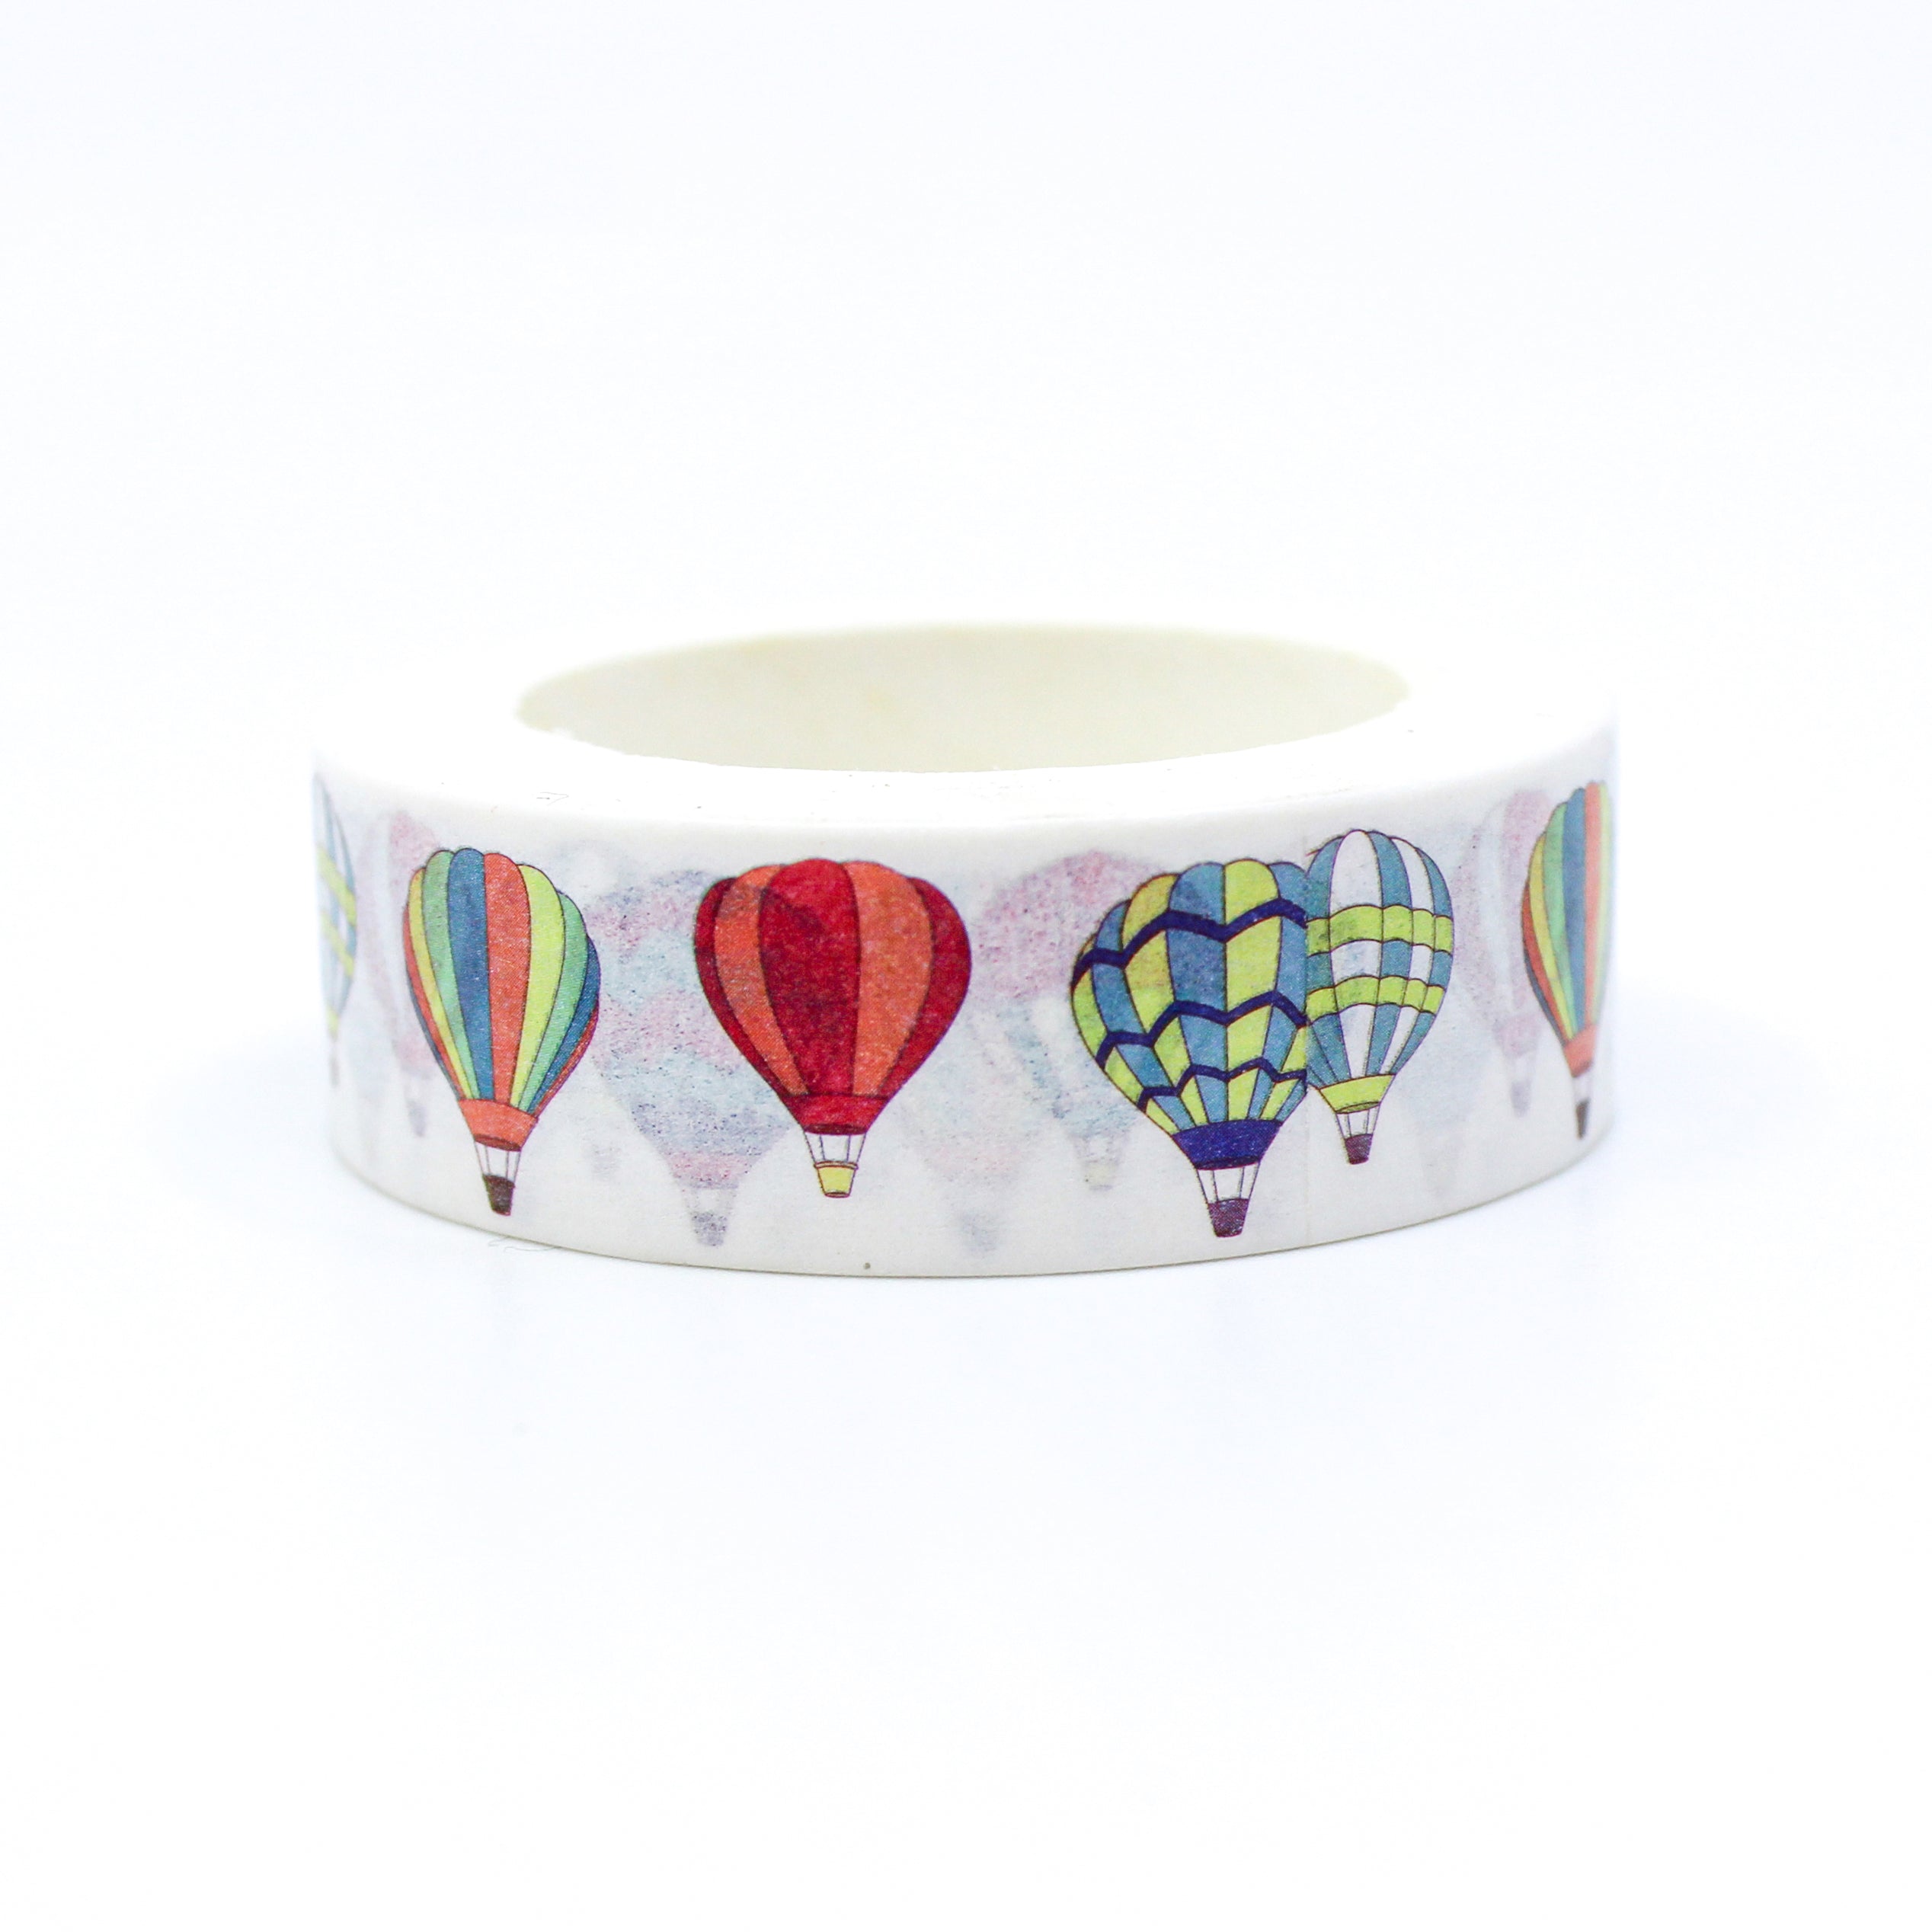 This a cute whimsical colorful air balloons pattern washi tape from BBB Supplies Craft Shop